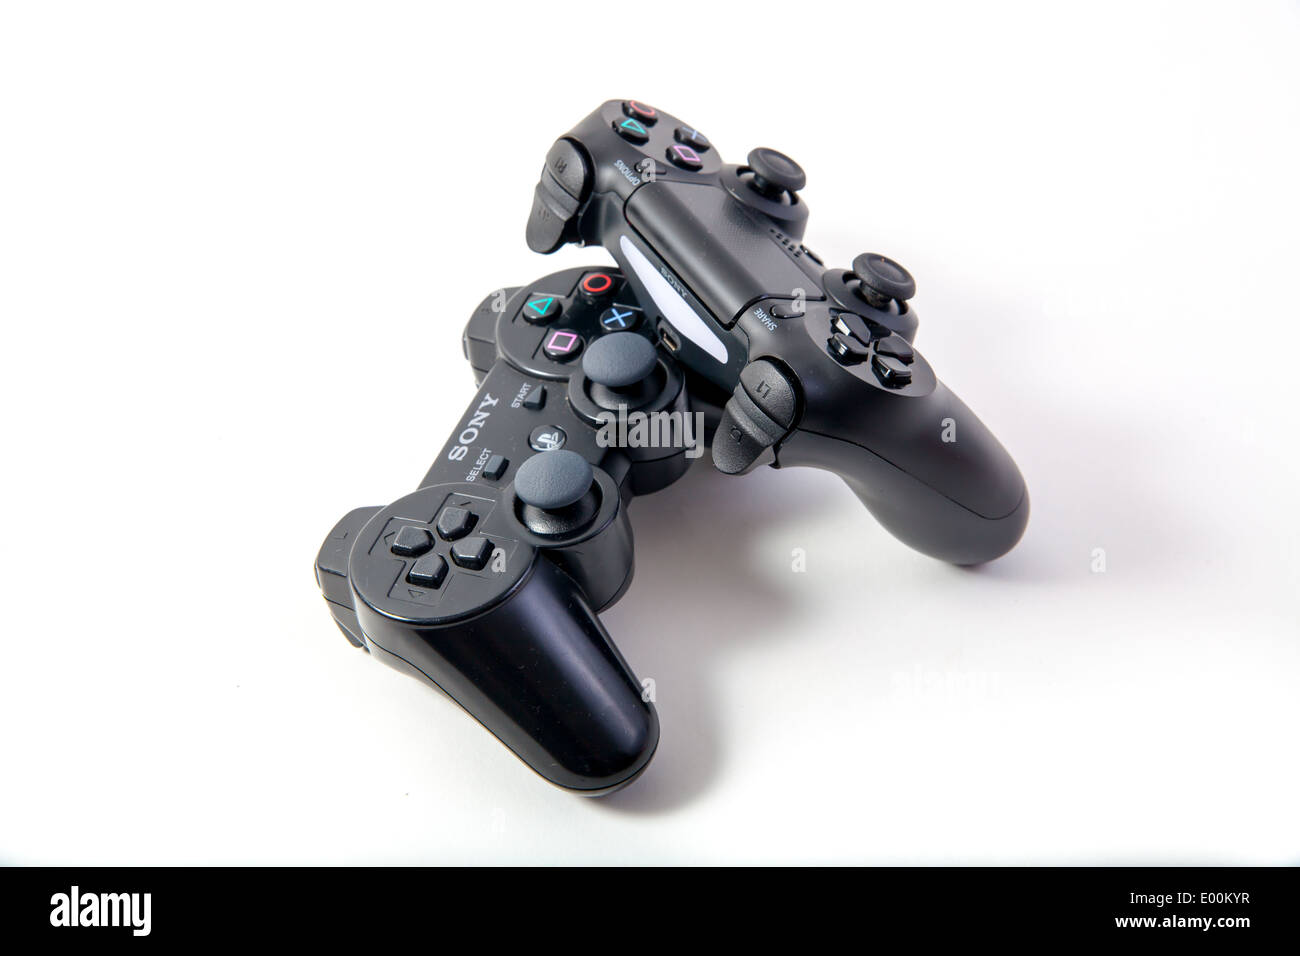 Sony Playstation 3 and 4 original authentic black gaming controllers on a  white studio background Stock Photo - Alamy